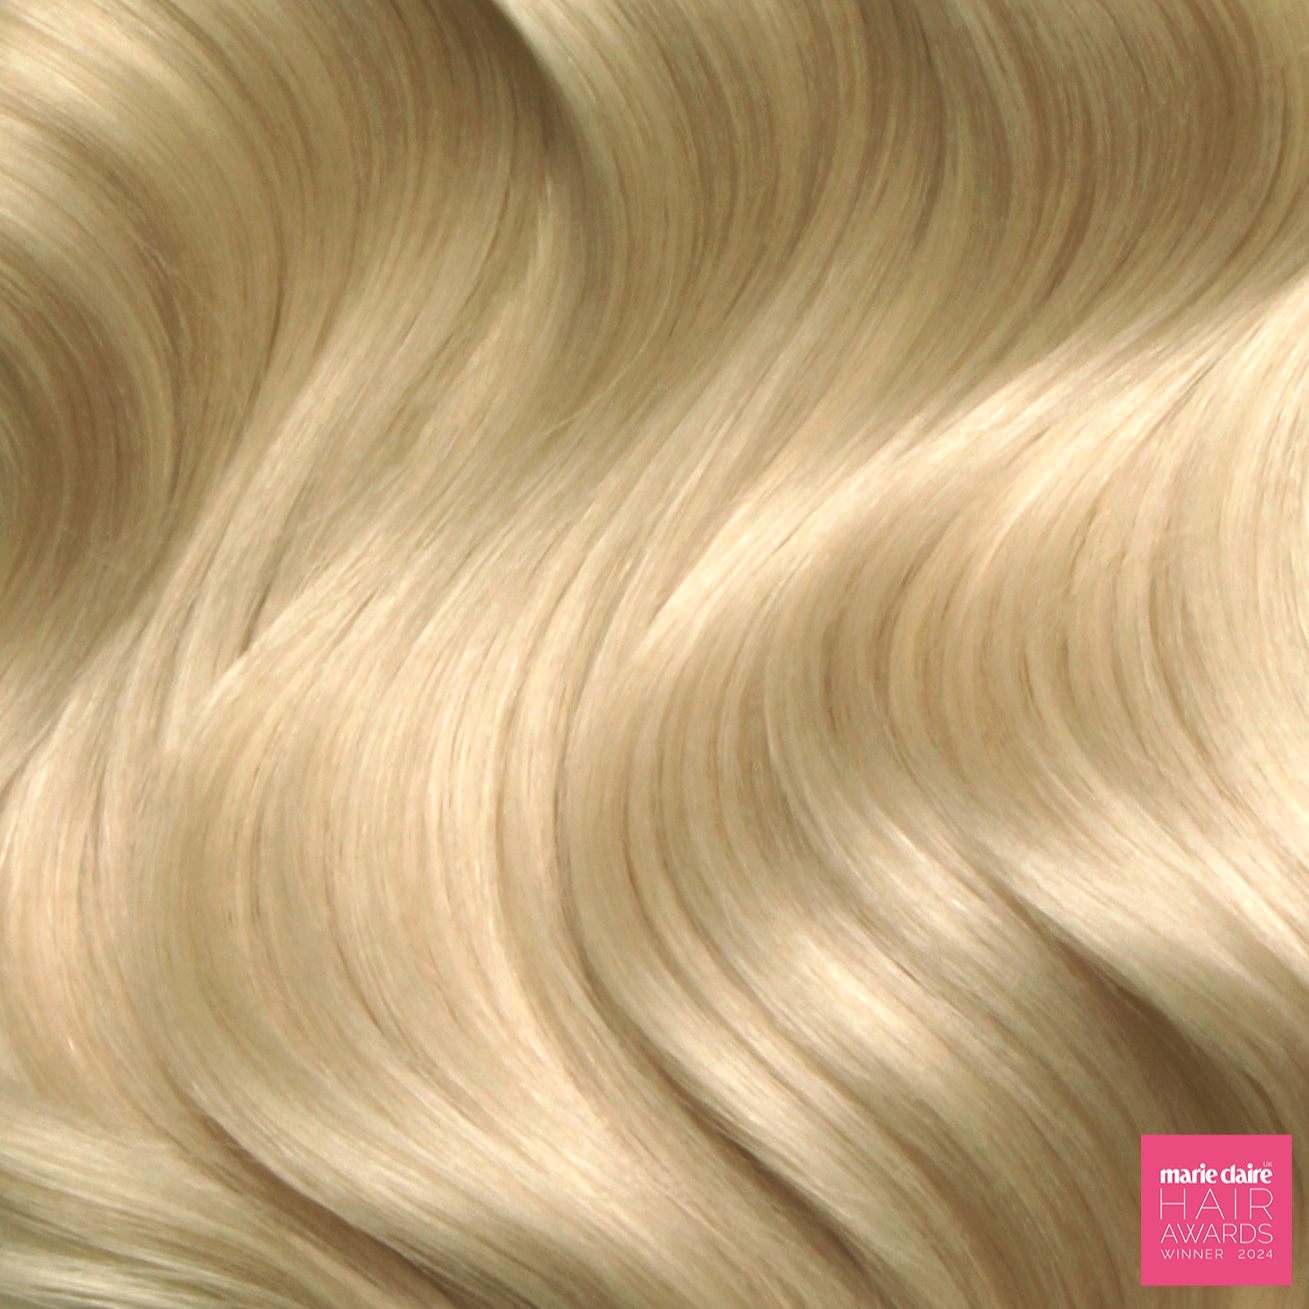 SEAMLESS® Tapes 14 inch - SWAY Hair Extensions - Thin, flexible, and discreet. 100% Double Drawn Remy Human Hair. Versatile and reusable. Shade - LA BLONDE